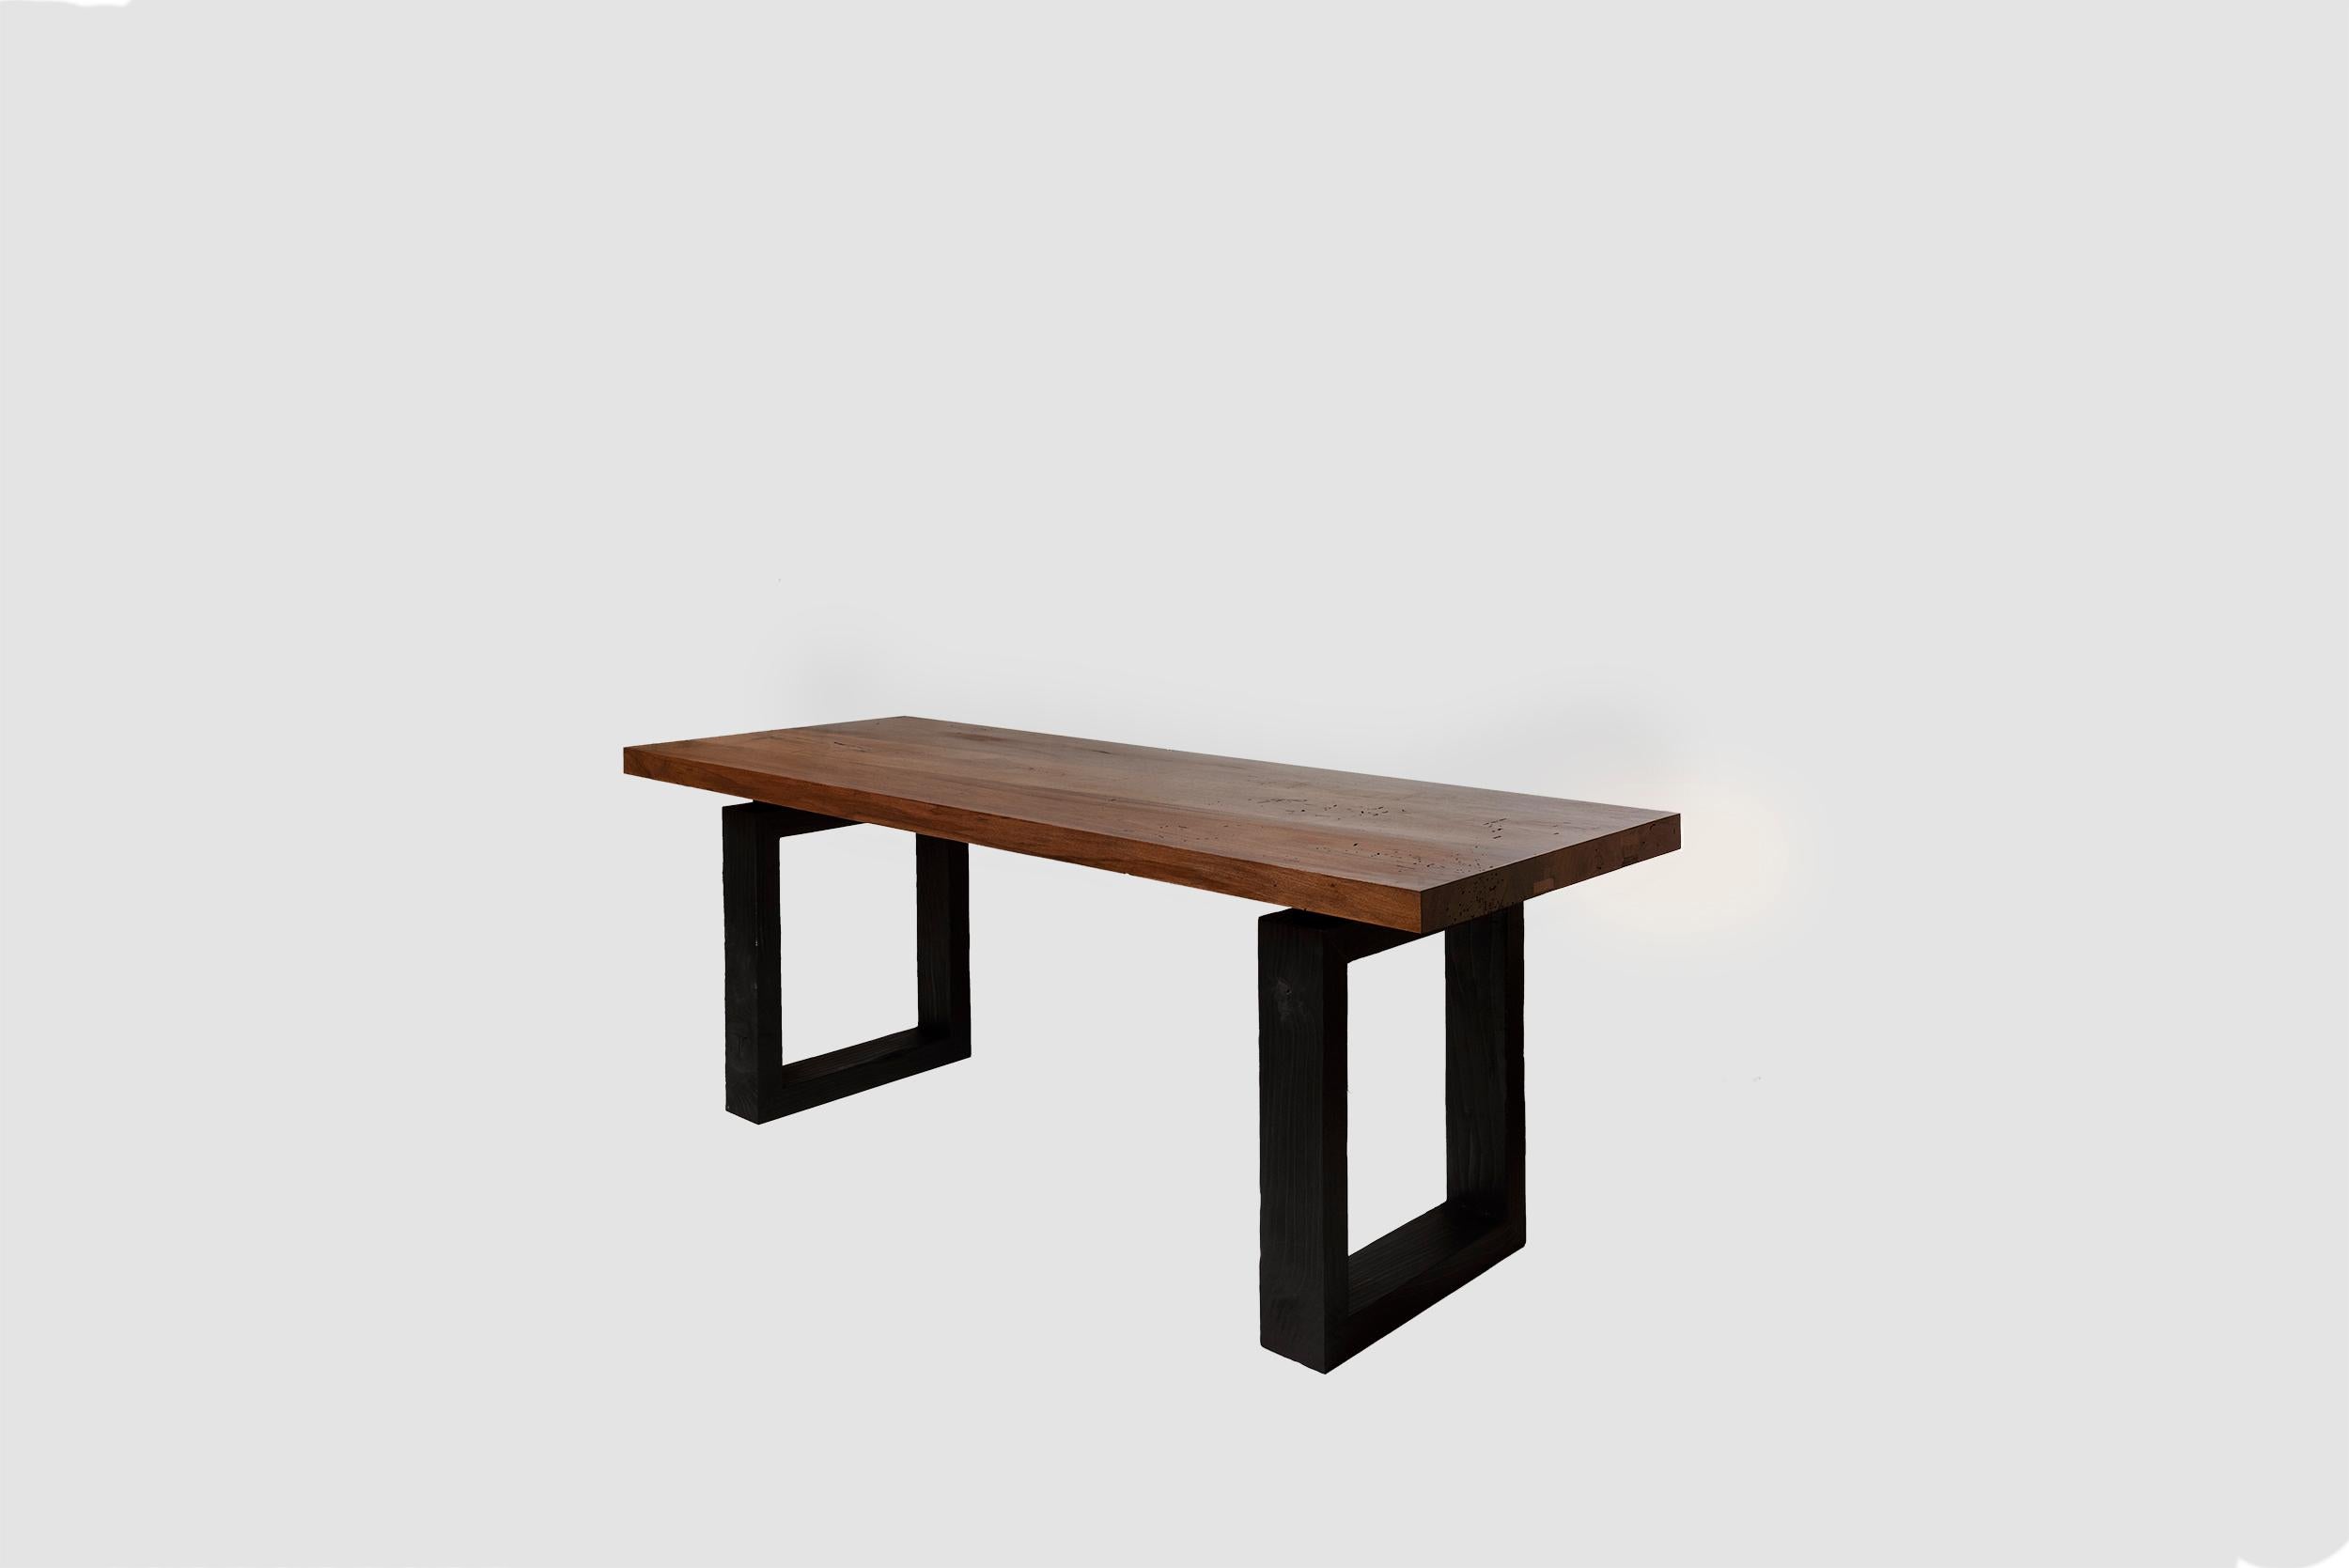 Italian Block Table in Solid Walnut and Charred Cedar Wood by Studio F For Sale